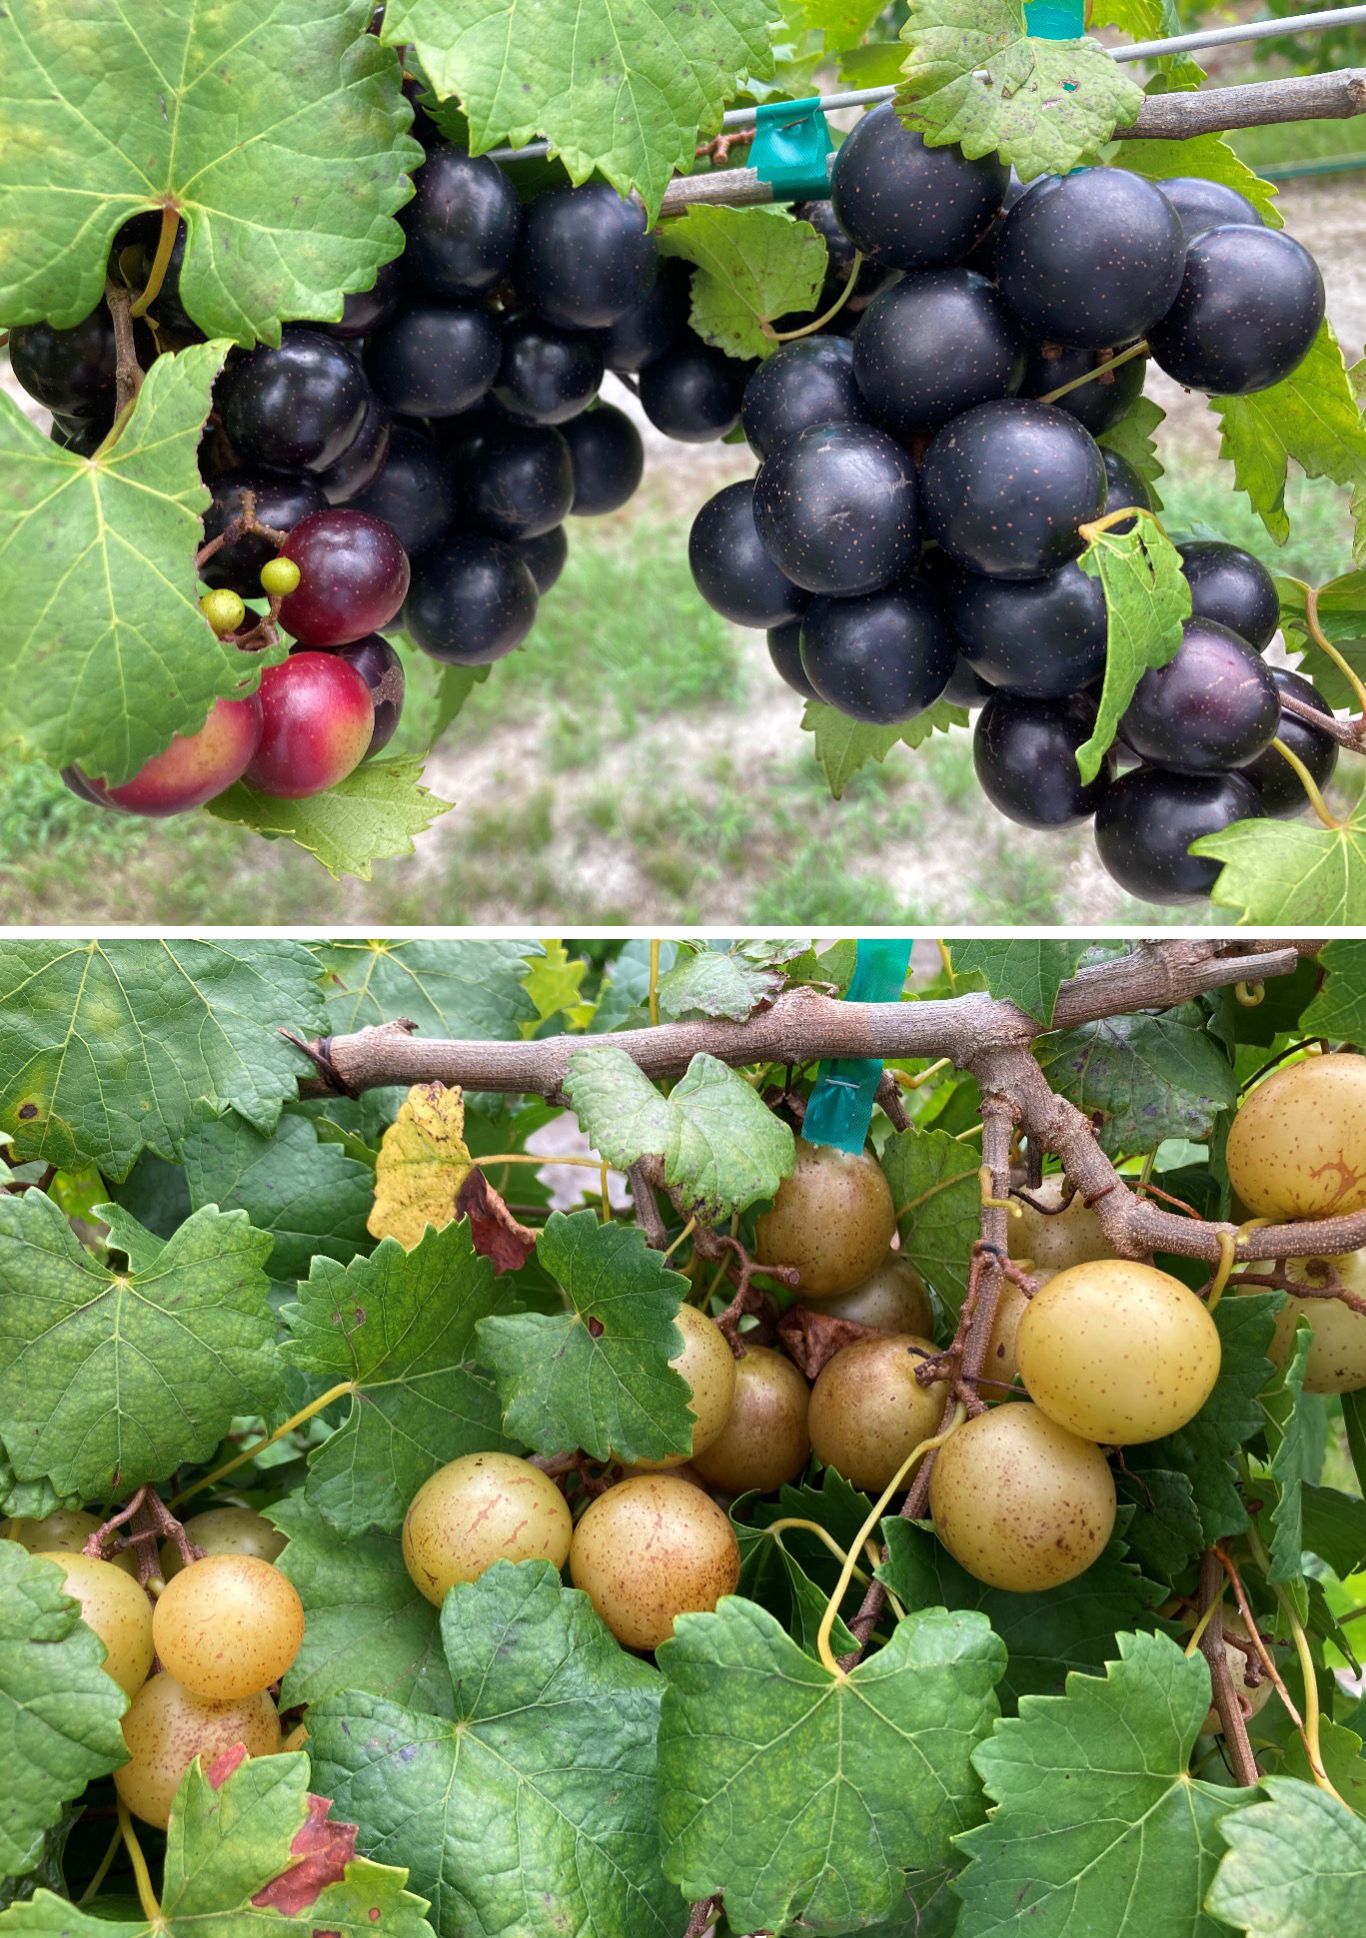 Black (top) and) bronze (bottom) color muscadine grapes grown at UF/IFAS Plant Scinece and Education Unit, Citra, FL. 